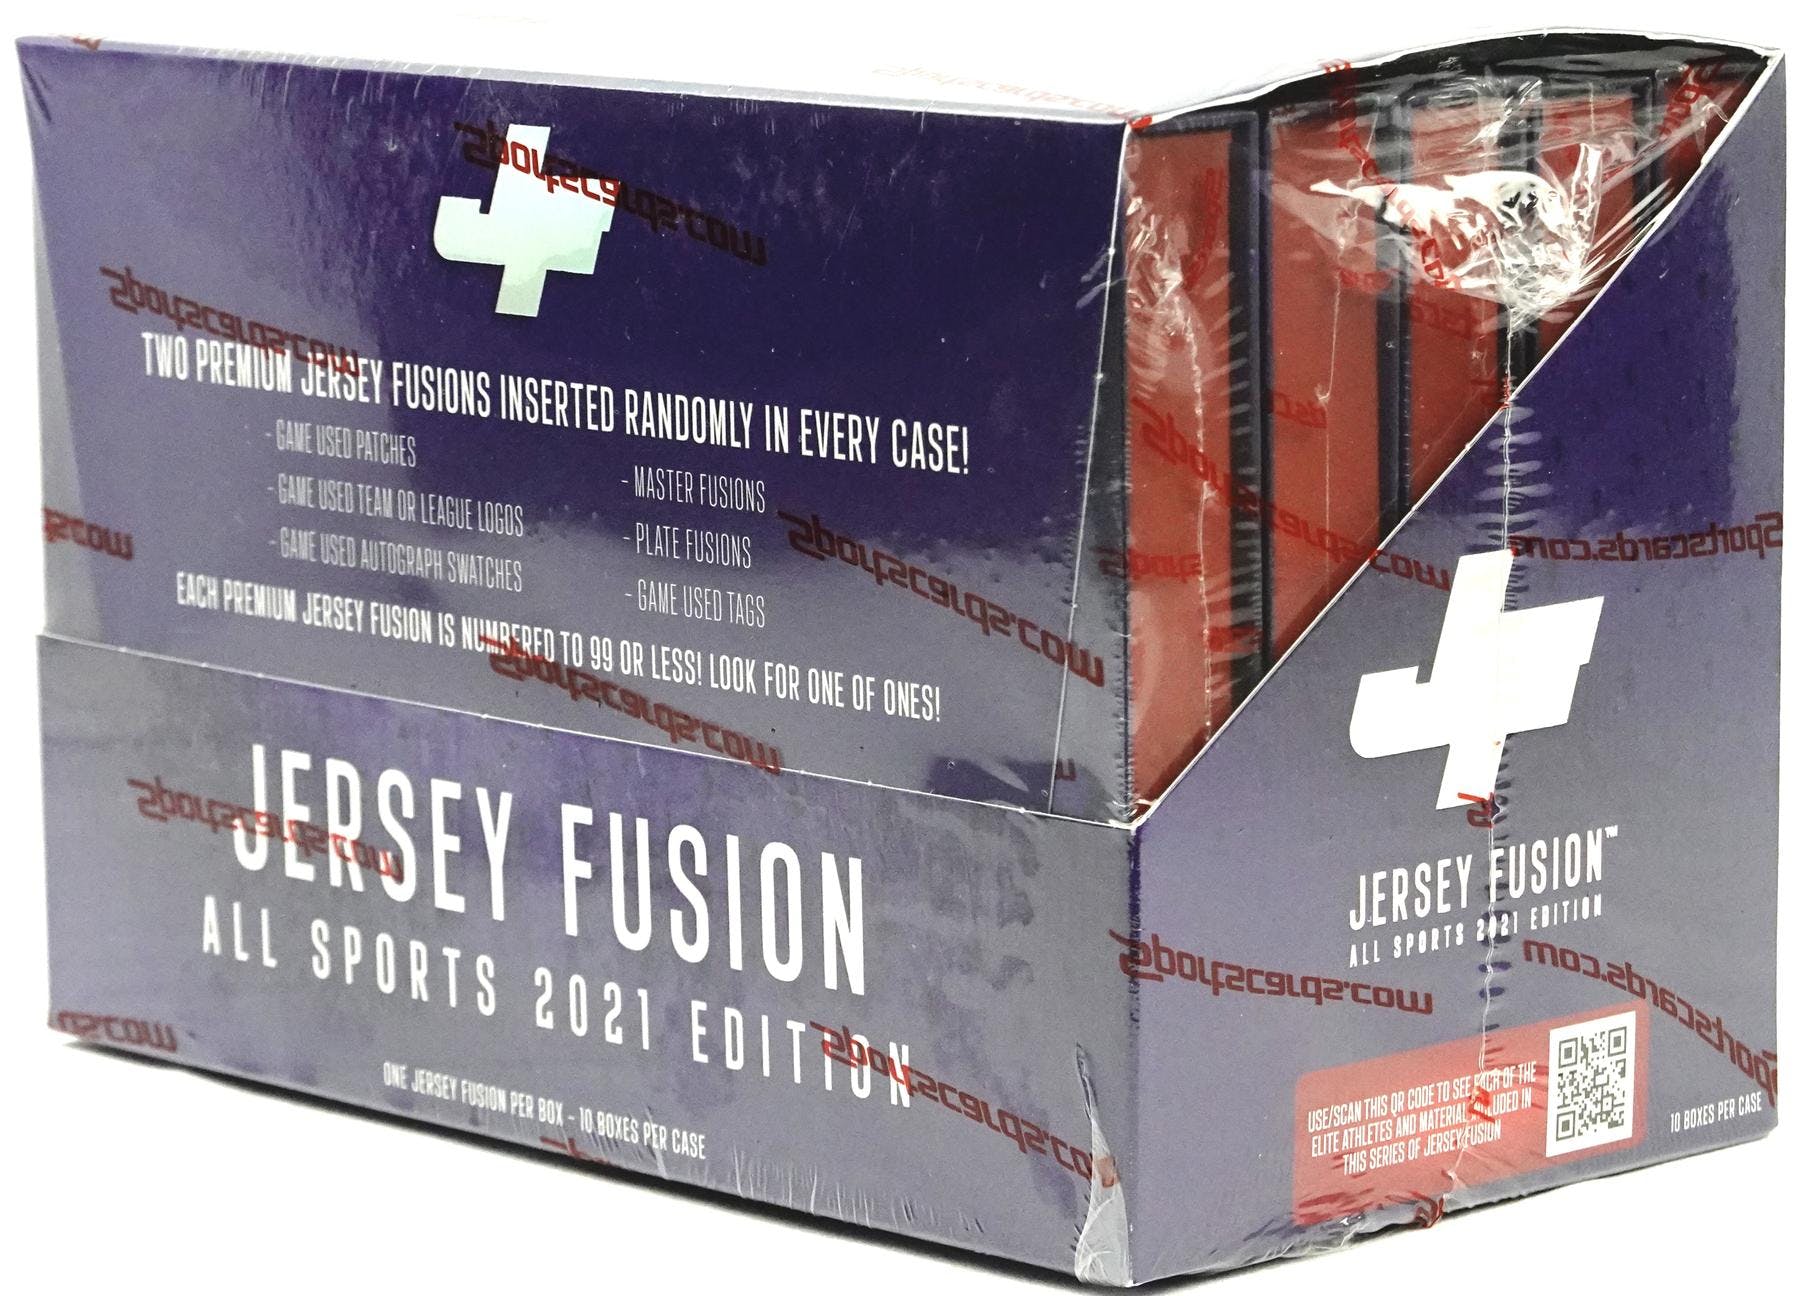 SPORTS CARDS Jersey Fusion 2021 All Sports Edition - cardsforbards